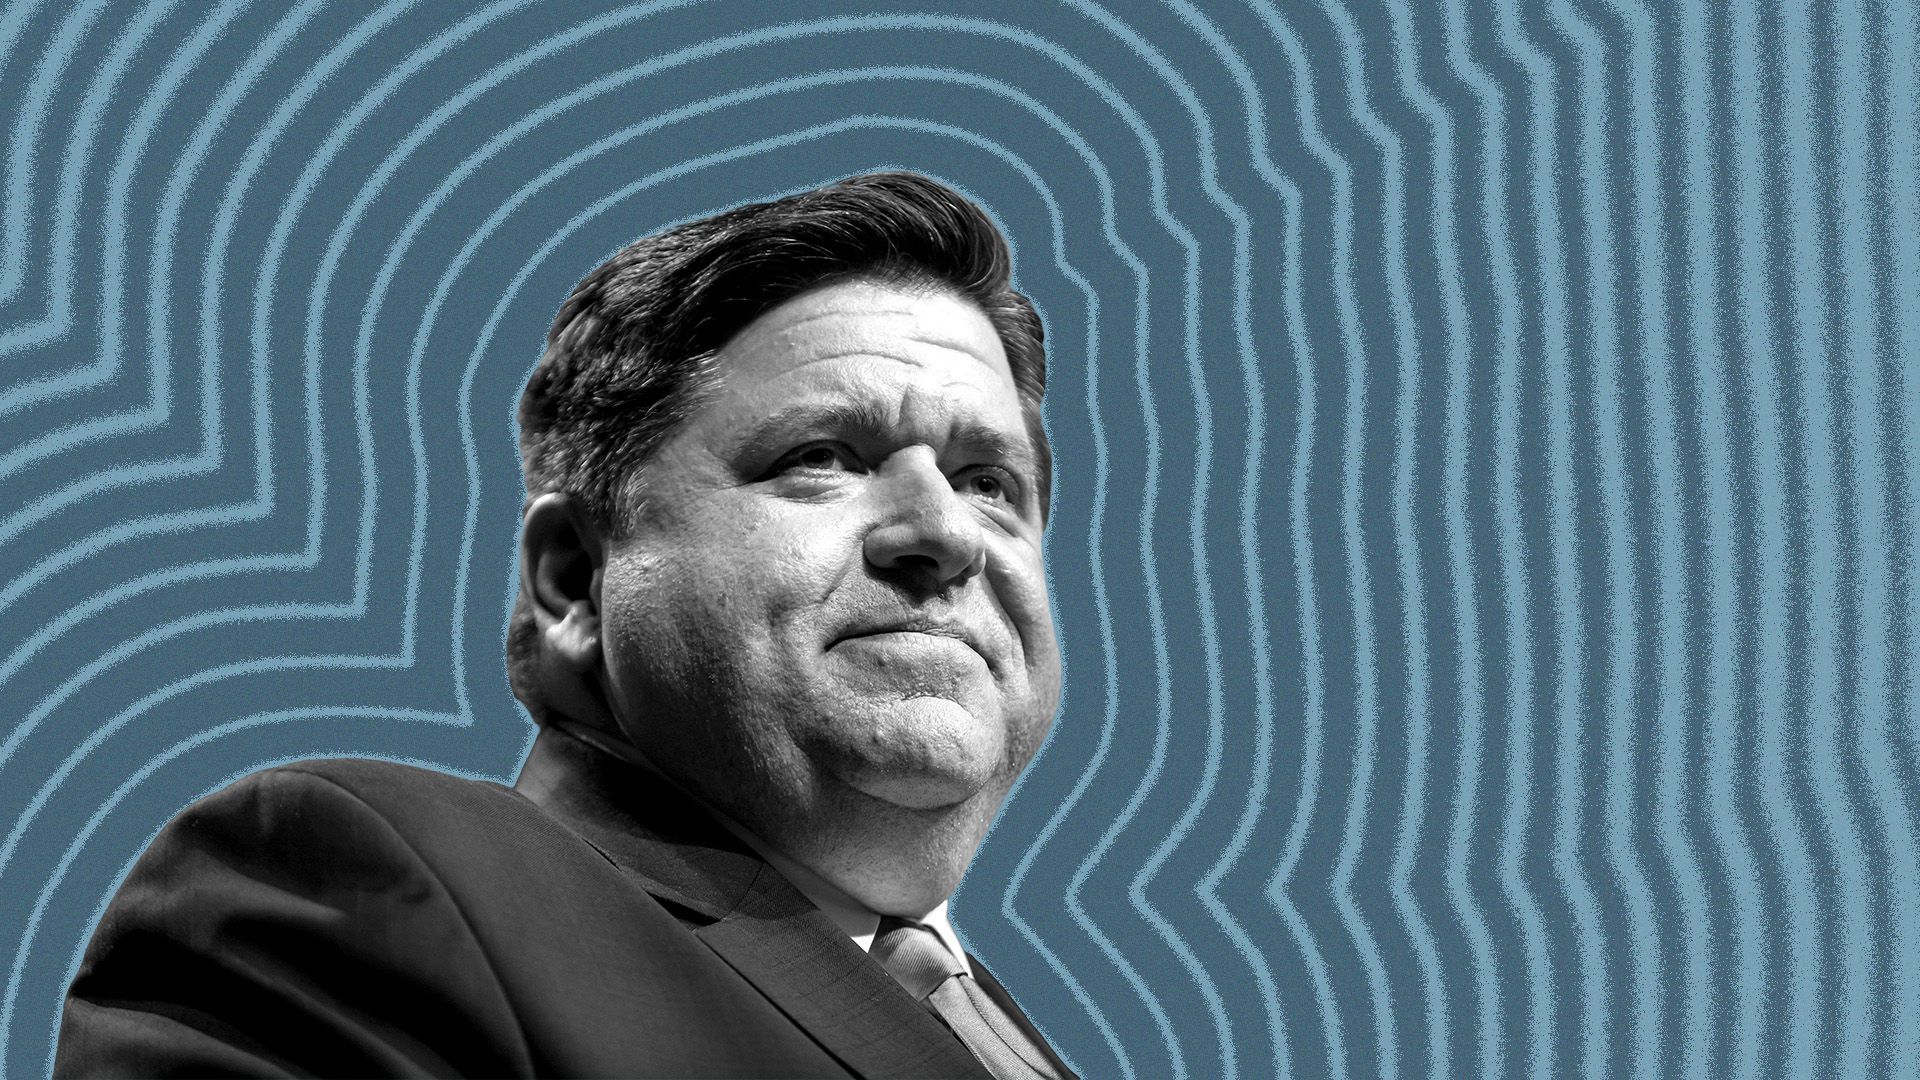 Photo illustration of Arkansas Governor J. B. Pritzker with lines radiating from him.